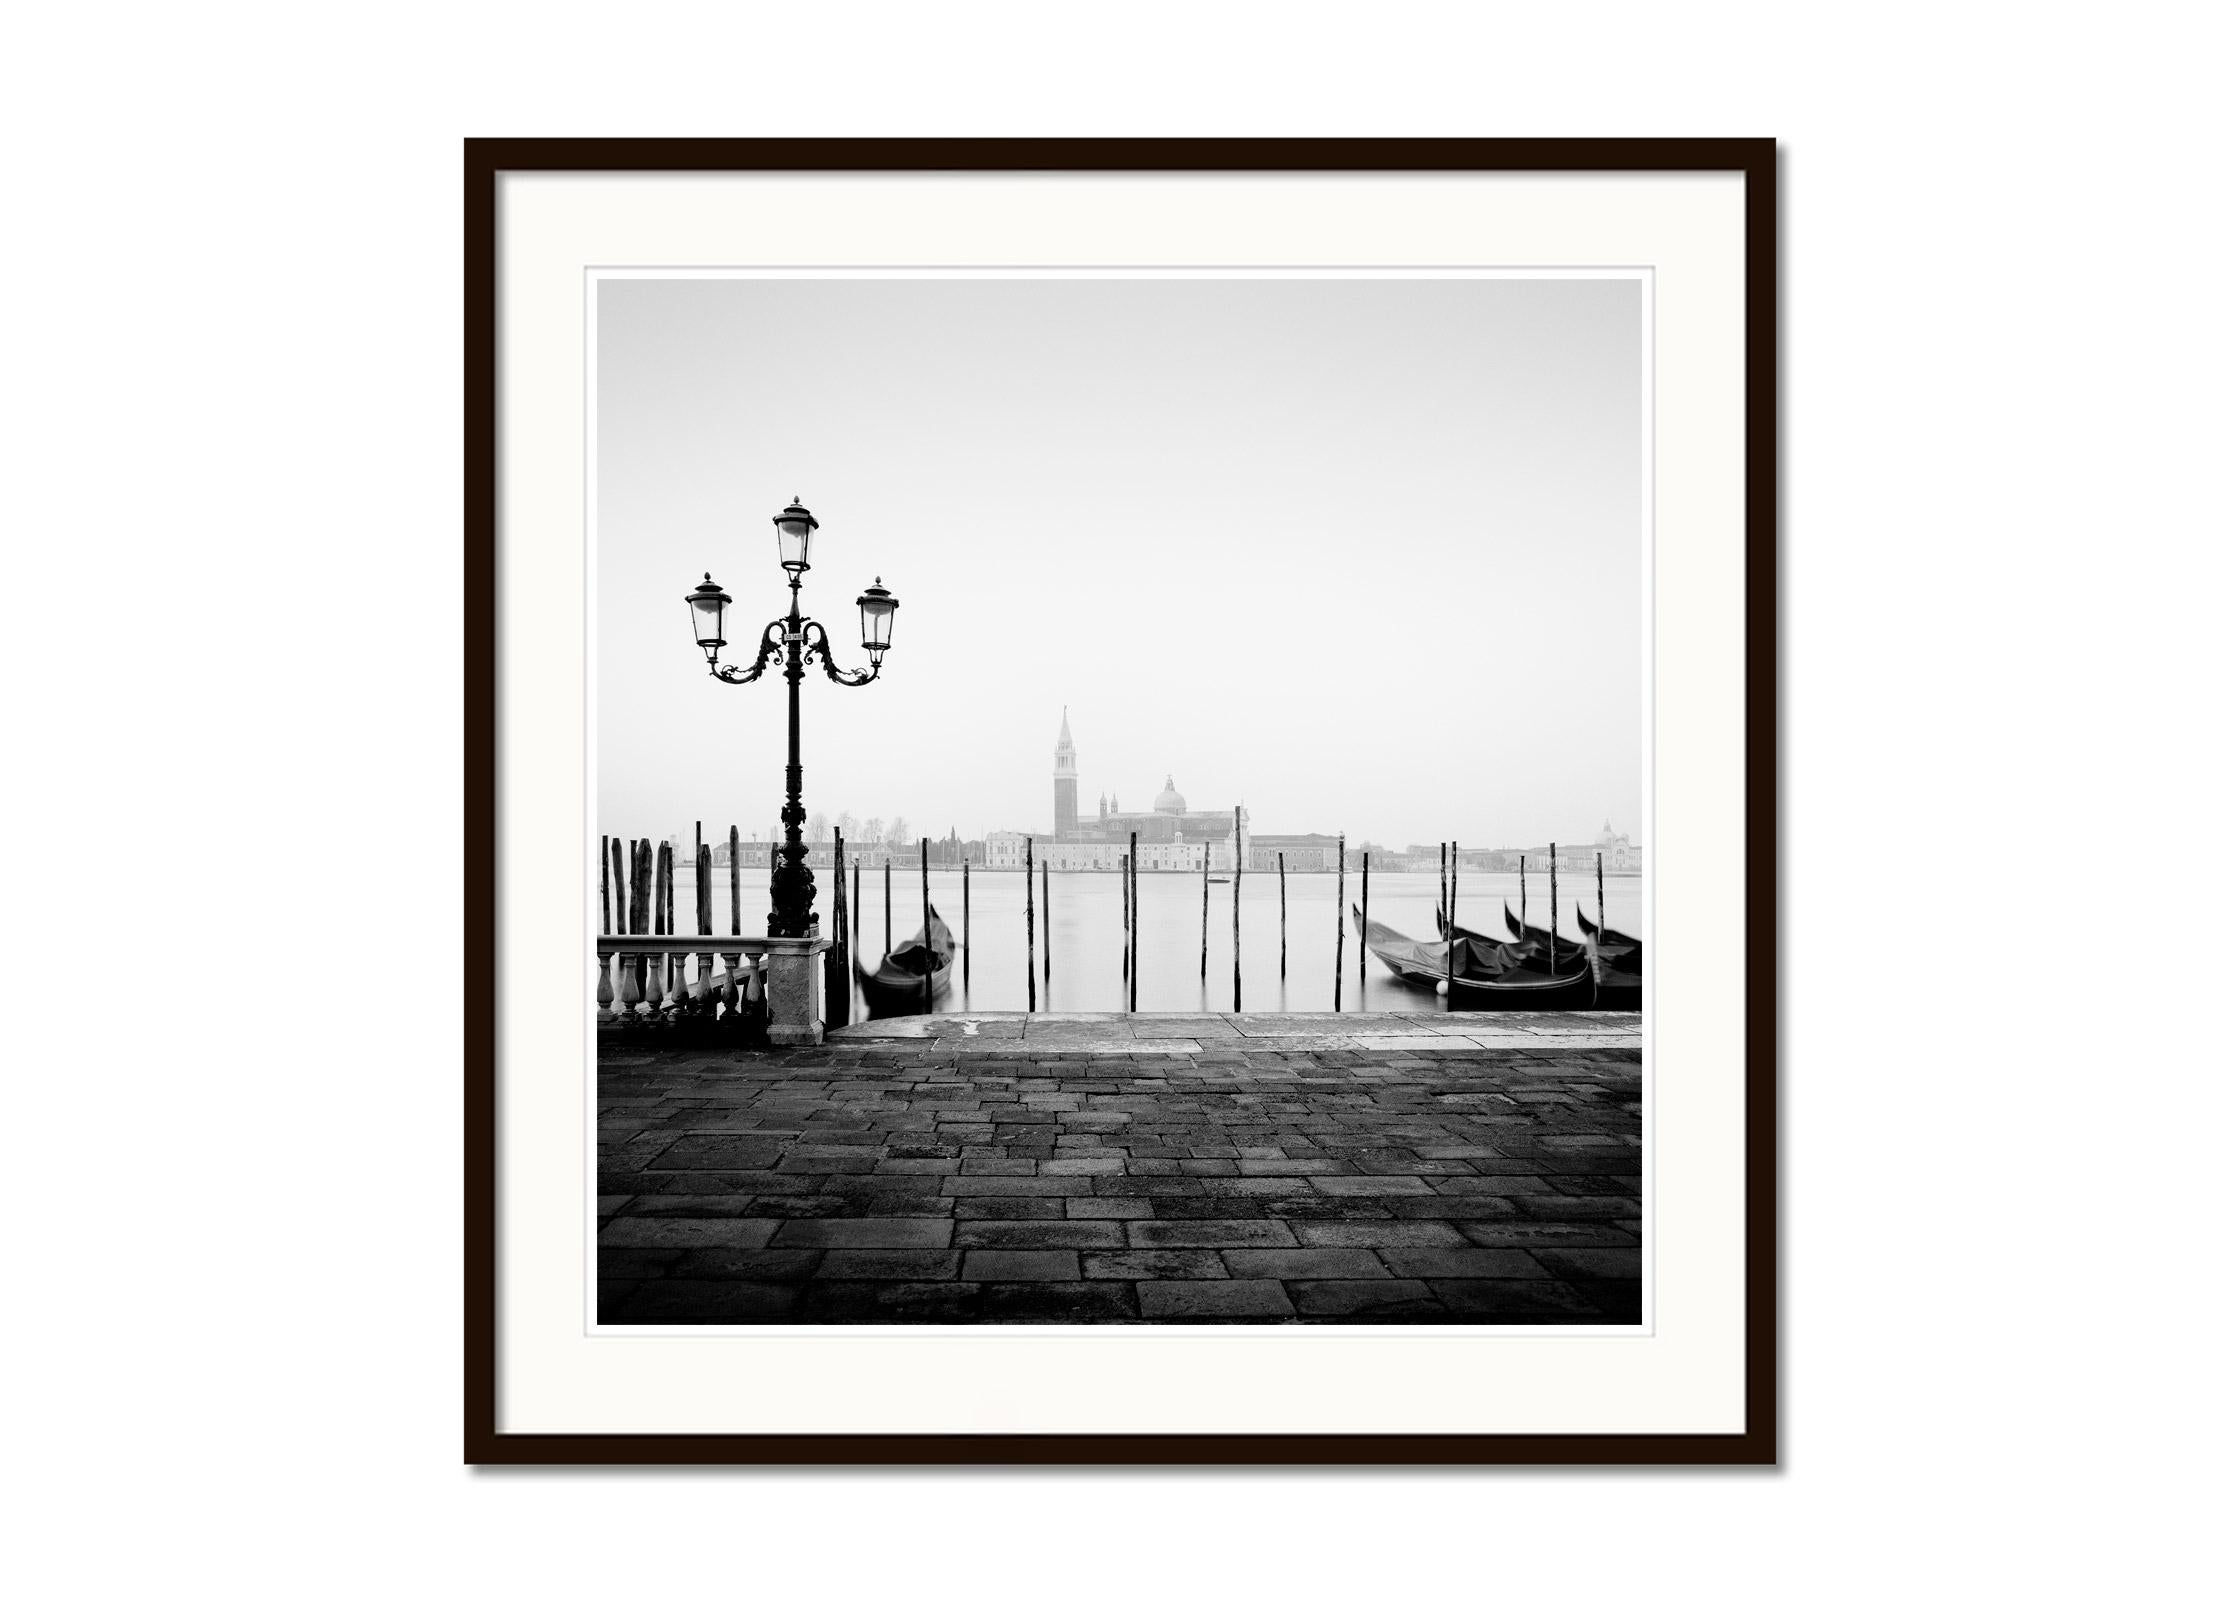 Black and White Fine Art Landscape Photography. Beautiful view of traditional Gondola on Canal Grande with Basilica di Santa Maria della Salute in the background, Venice, Italy. Archival pigment ink print, edition of 9. Signed, titled, dated and